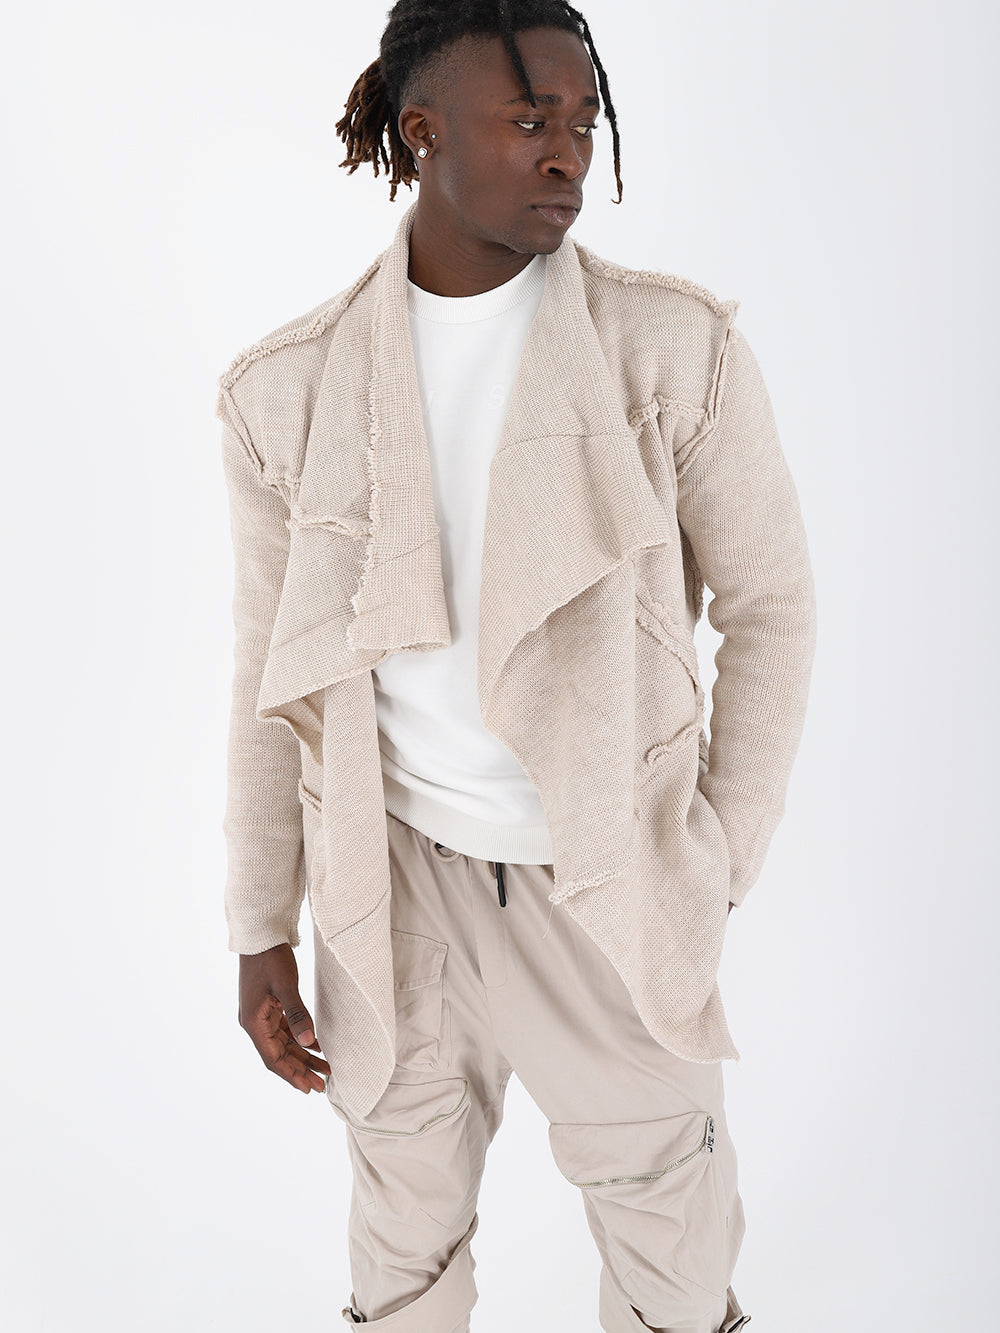 A man wearing an ASYMMETRIC SHORT CARDIGAN // IVORY in a beige jacket and tan pants, with a true to size fit.